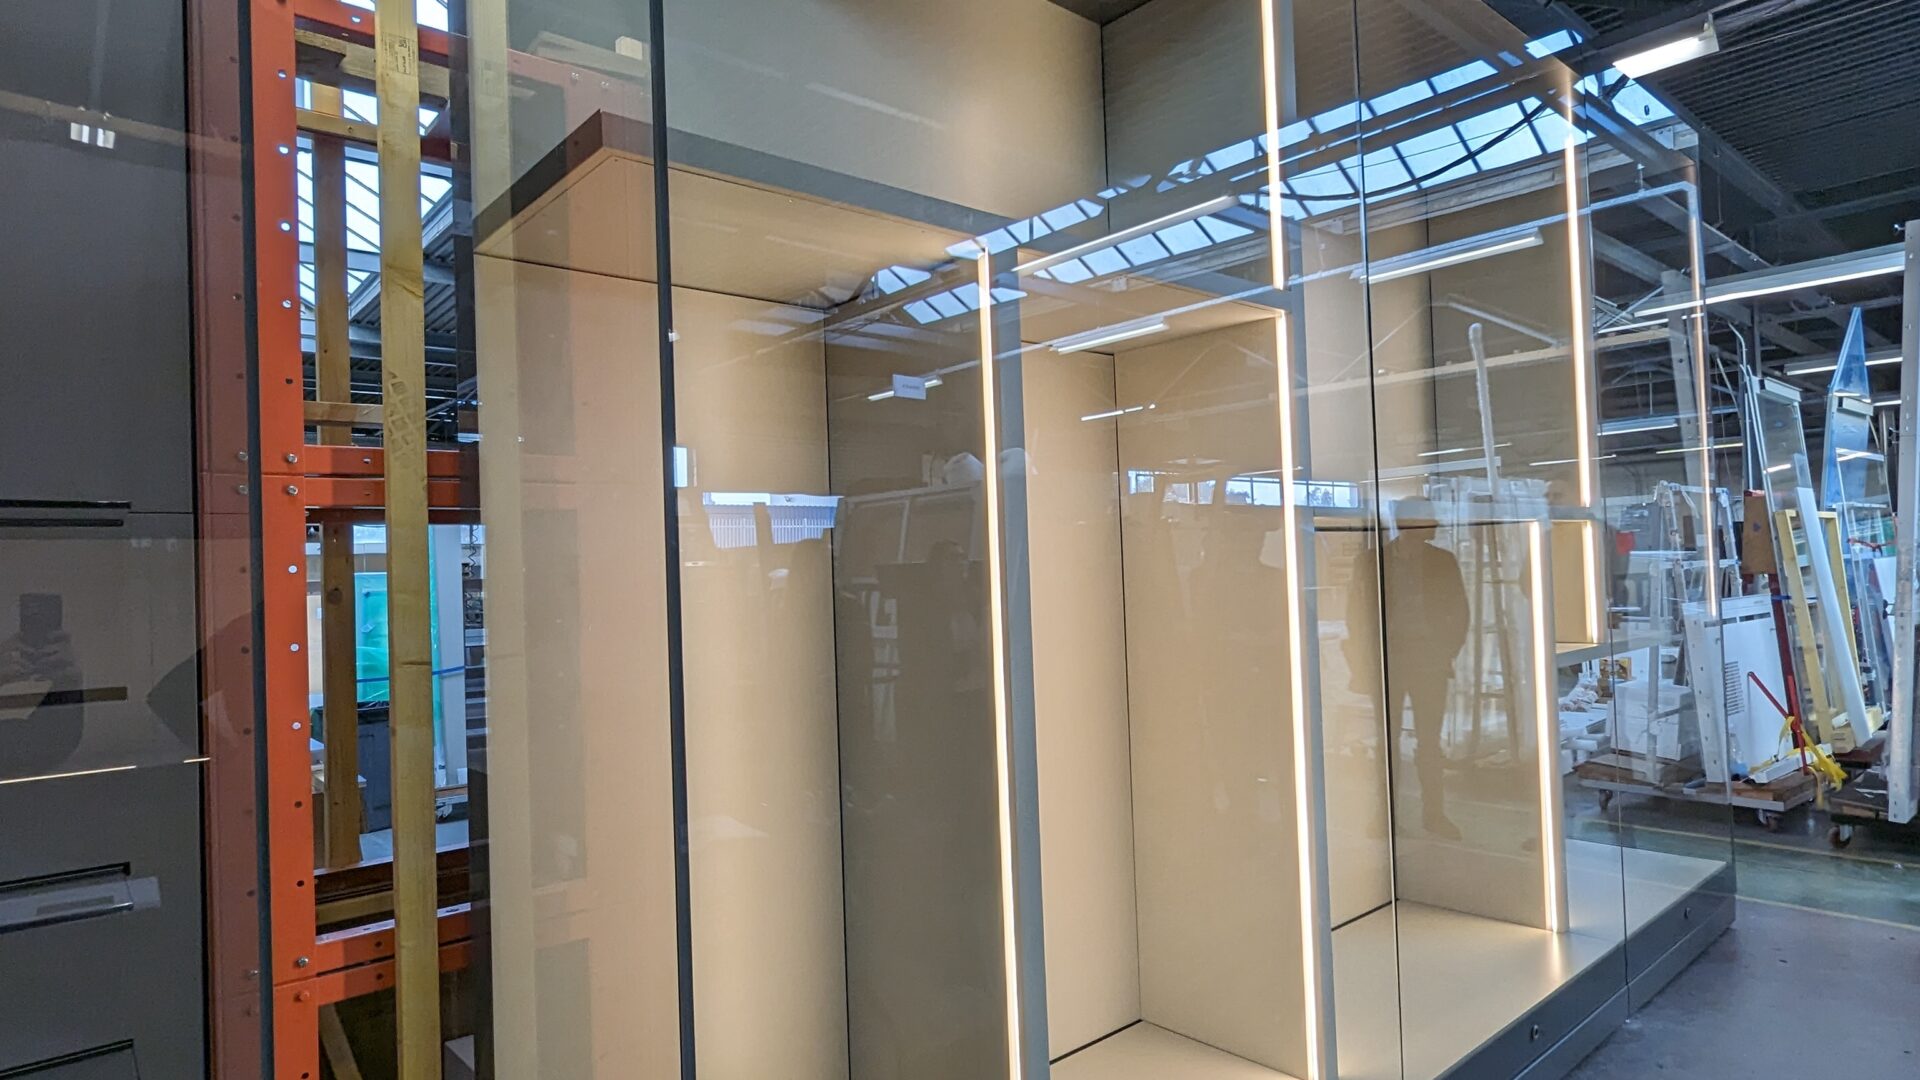 A large glass display case inside a warehouse.